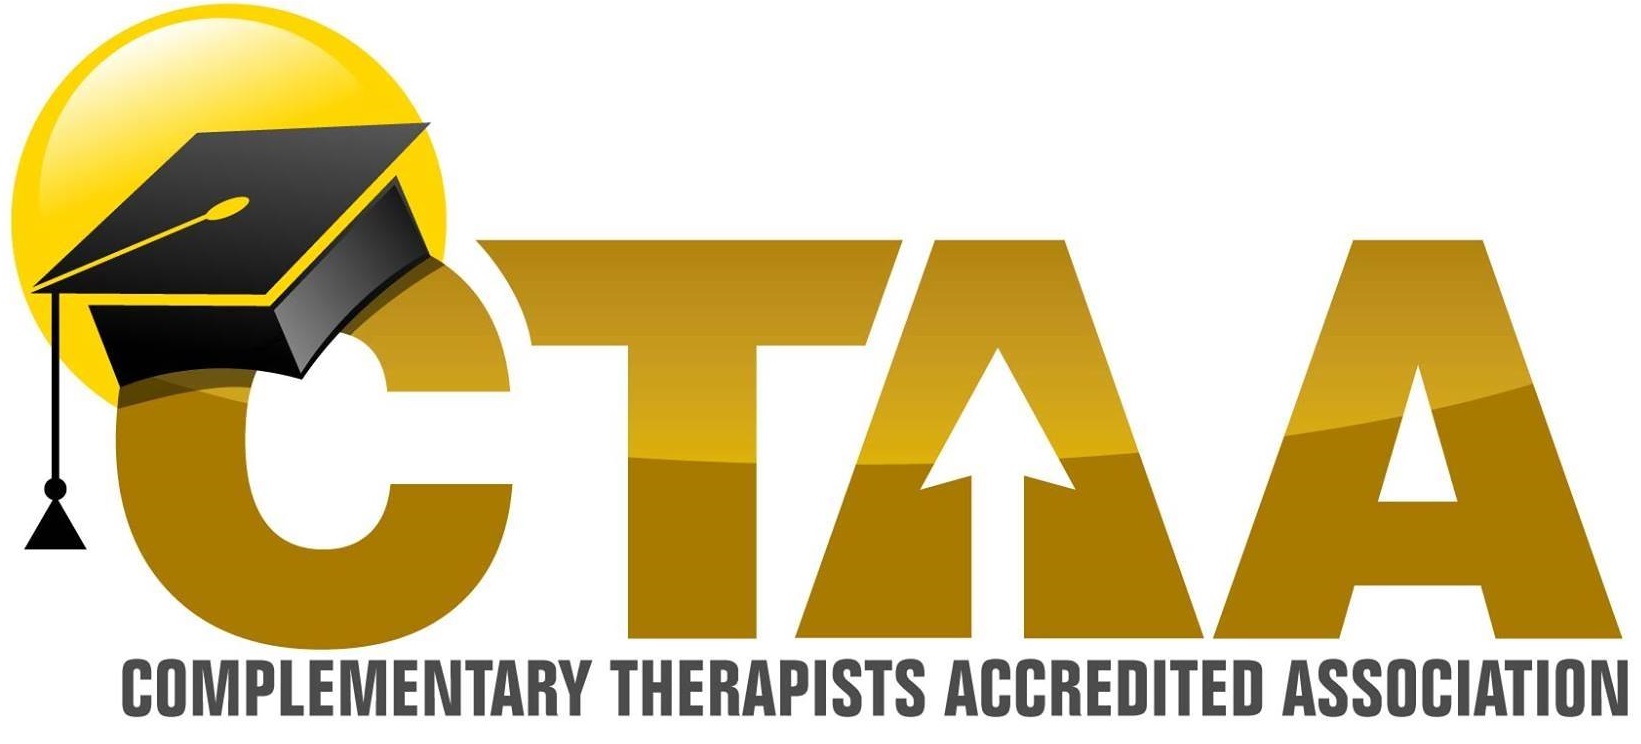 
Complementary Therapists Accredited Association